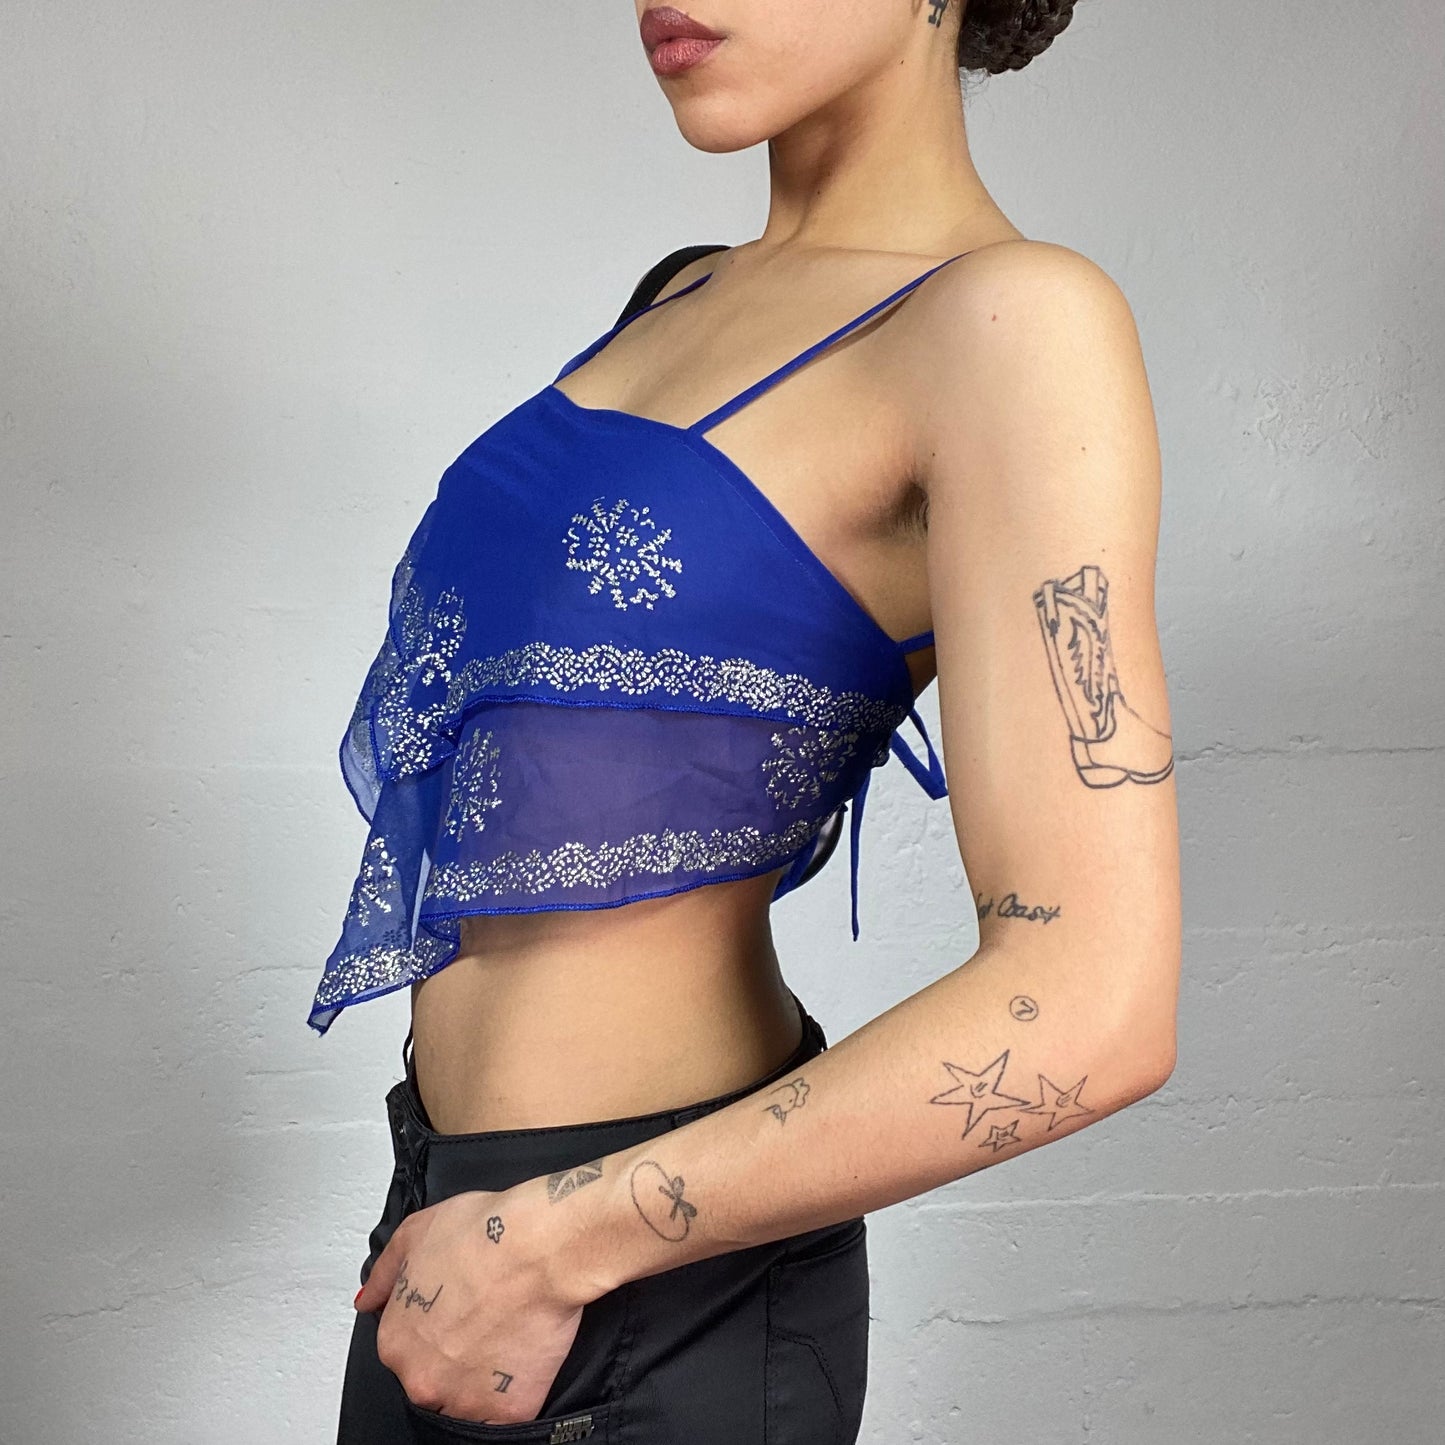 Vintage 2000's Festival Electric Blue Crop Top with Open Back and Mandala Print (S)